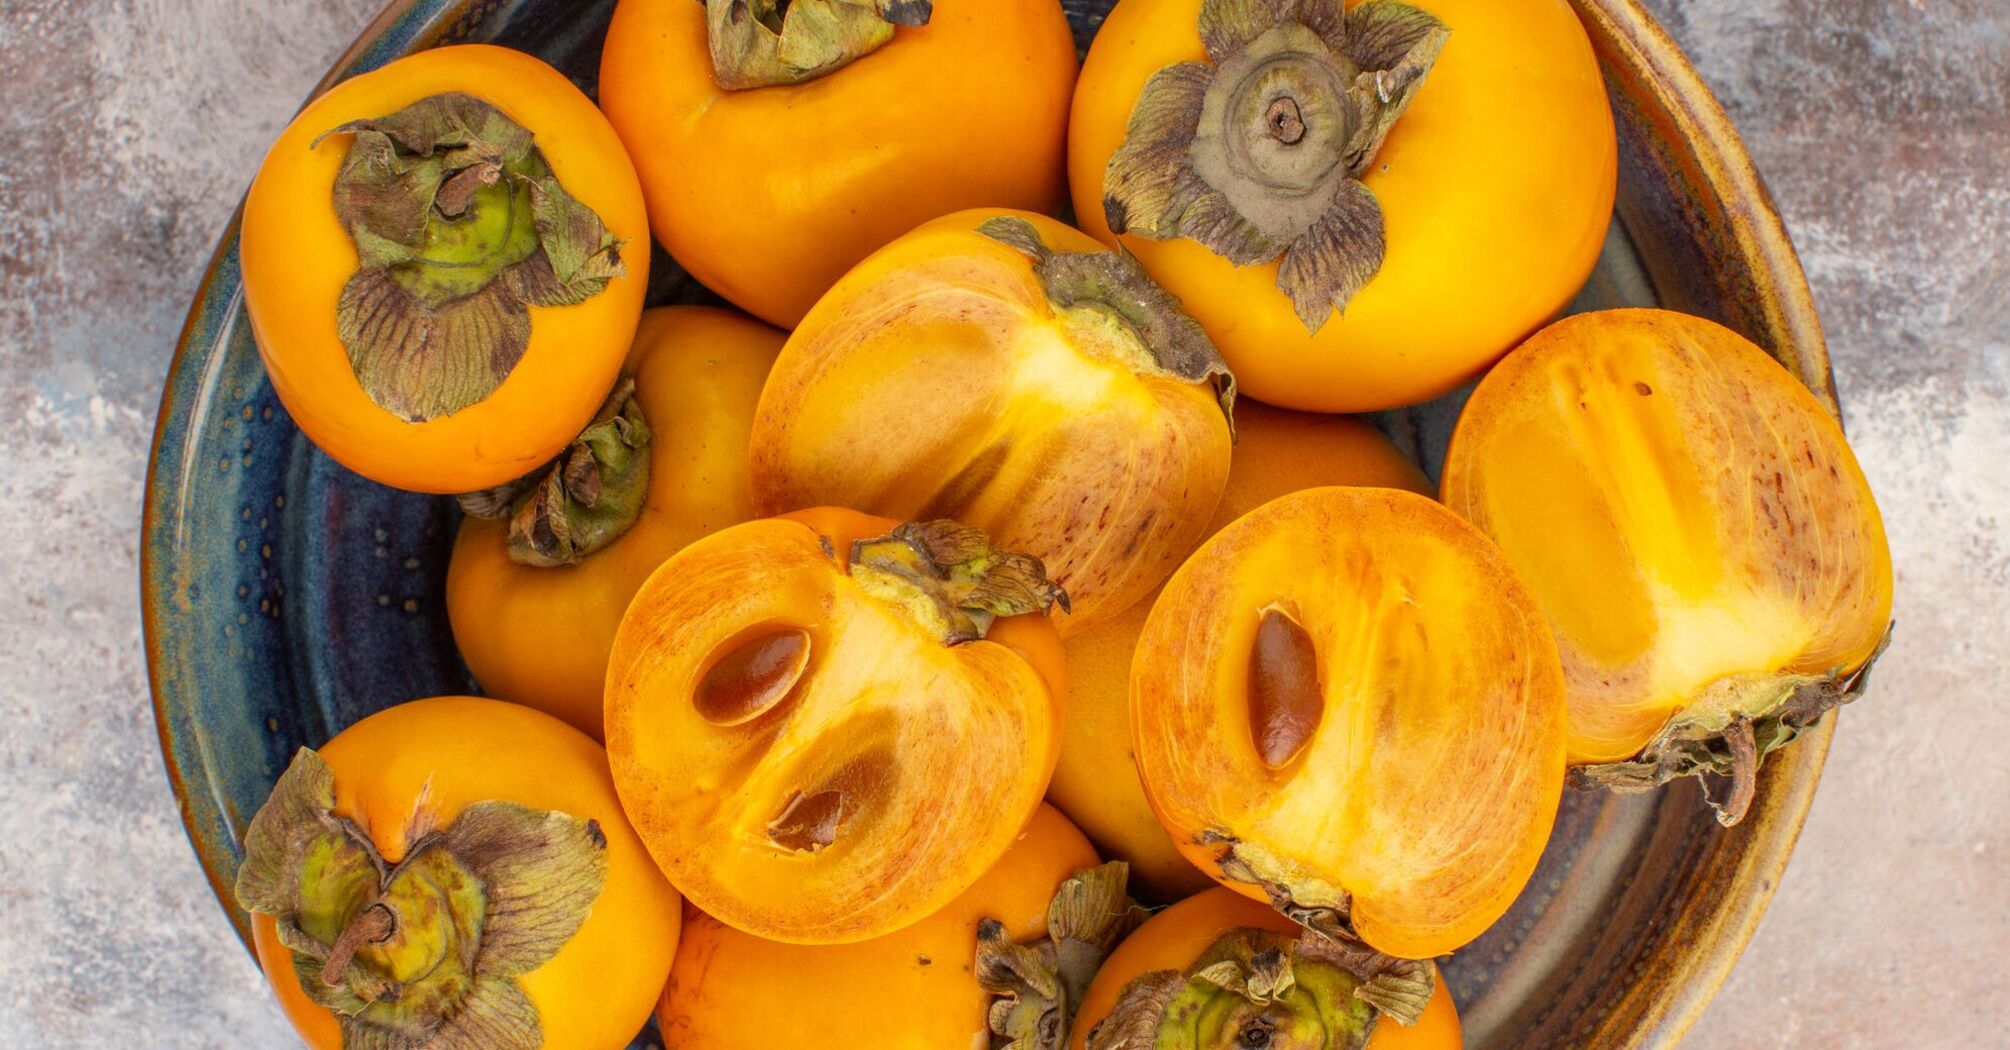 How to grow persimmons at home: tips